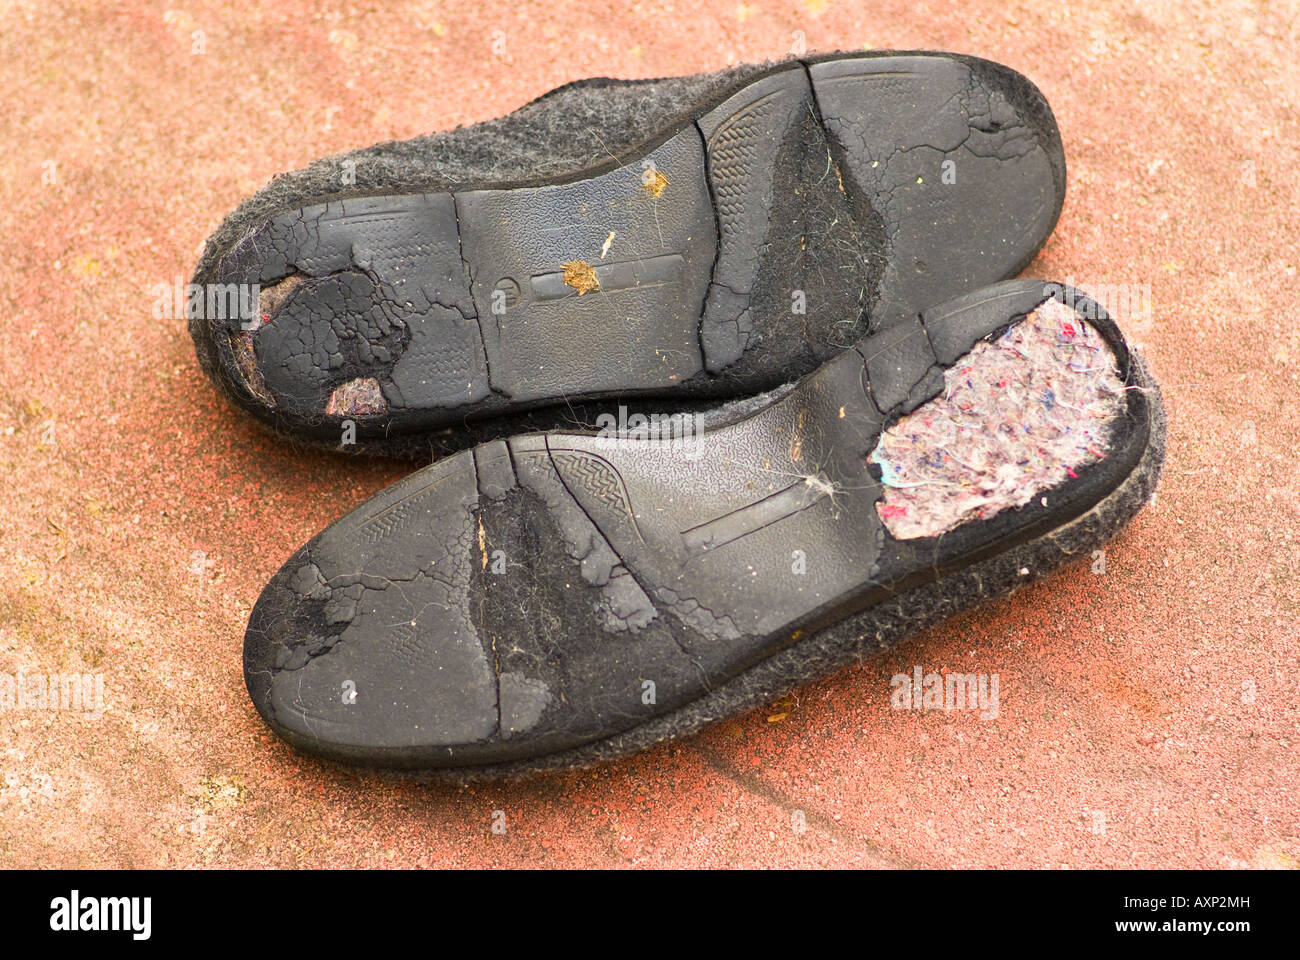 A pair of old slippers with worn soles and heels Stock Photo - Alamy